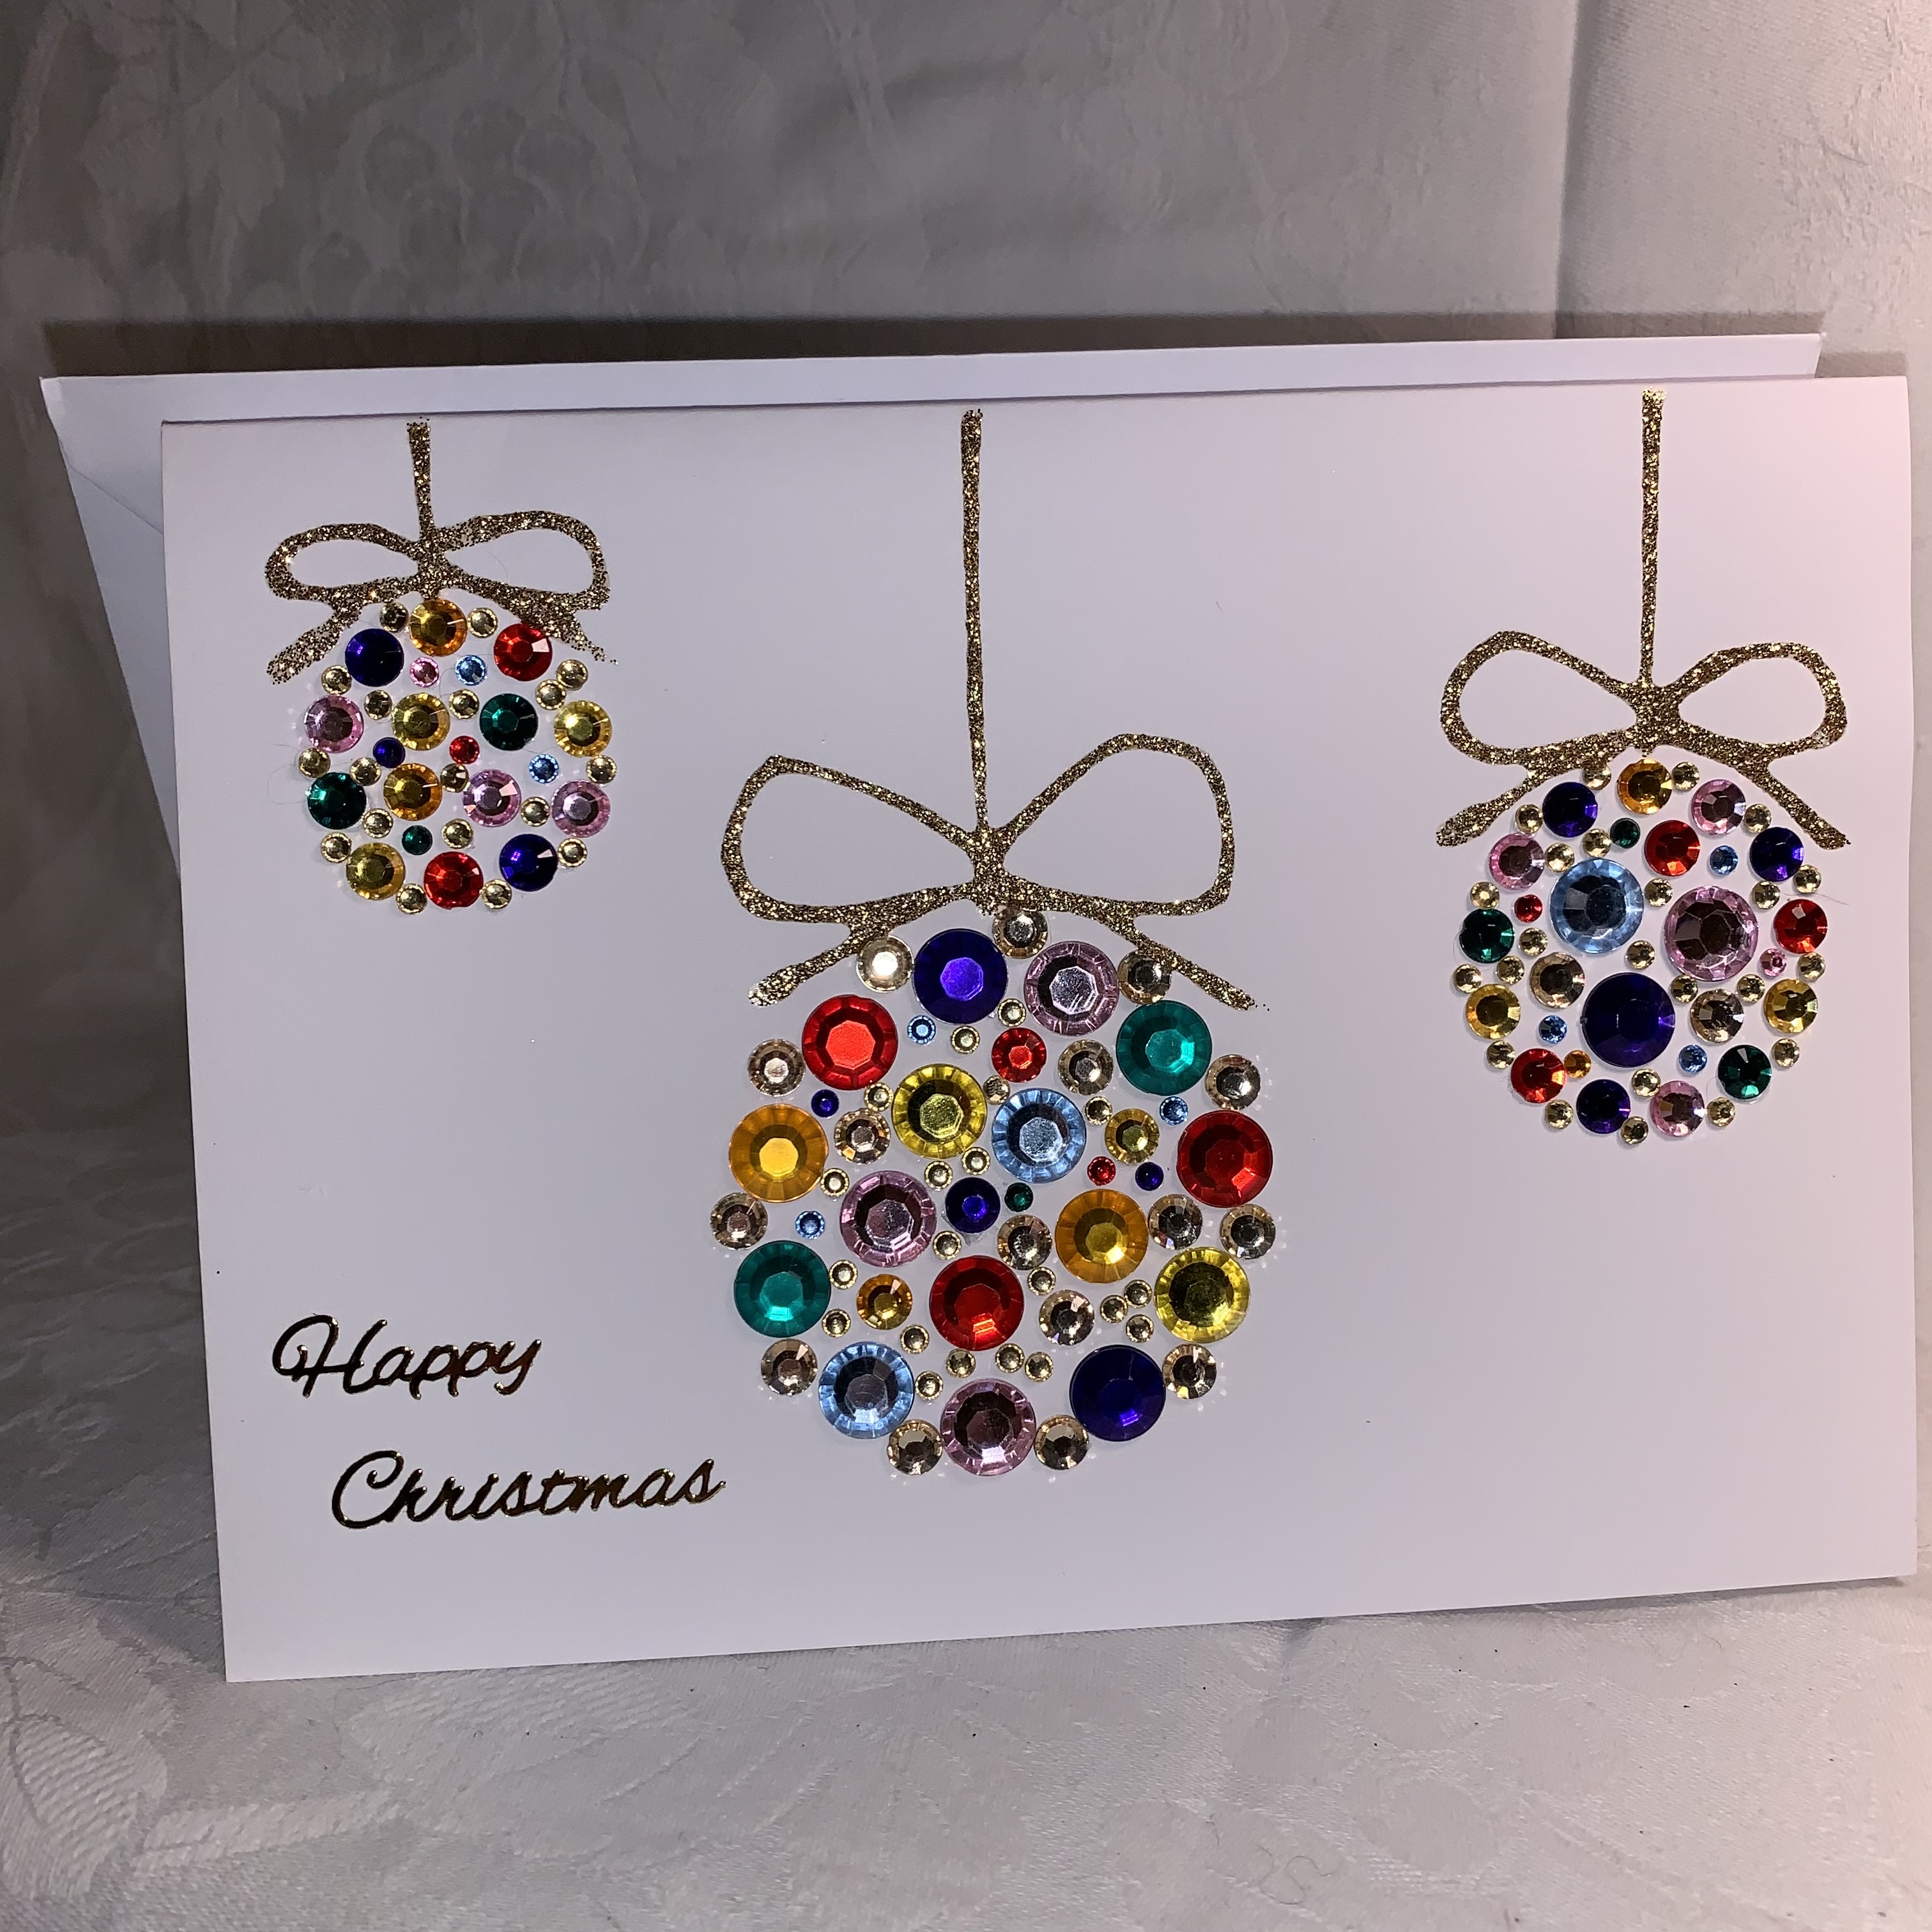 Cards Christmas 7×5 3 Multi Jewelled Baubles A £1.25